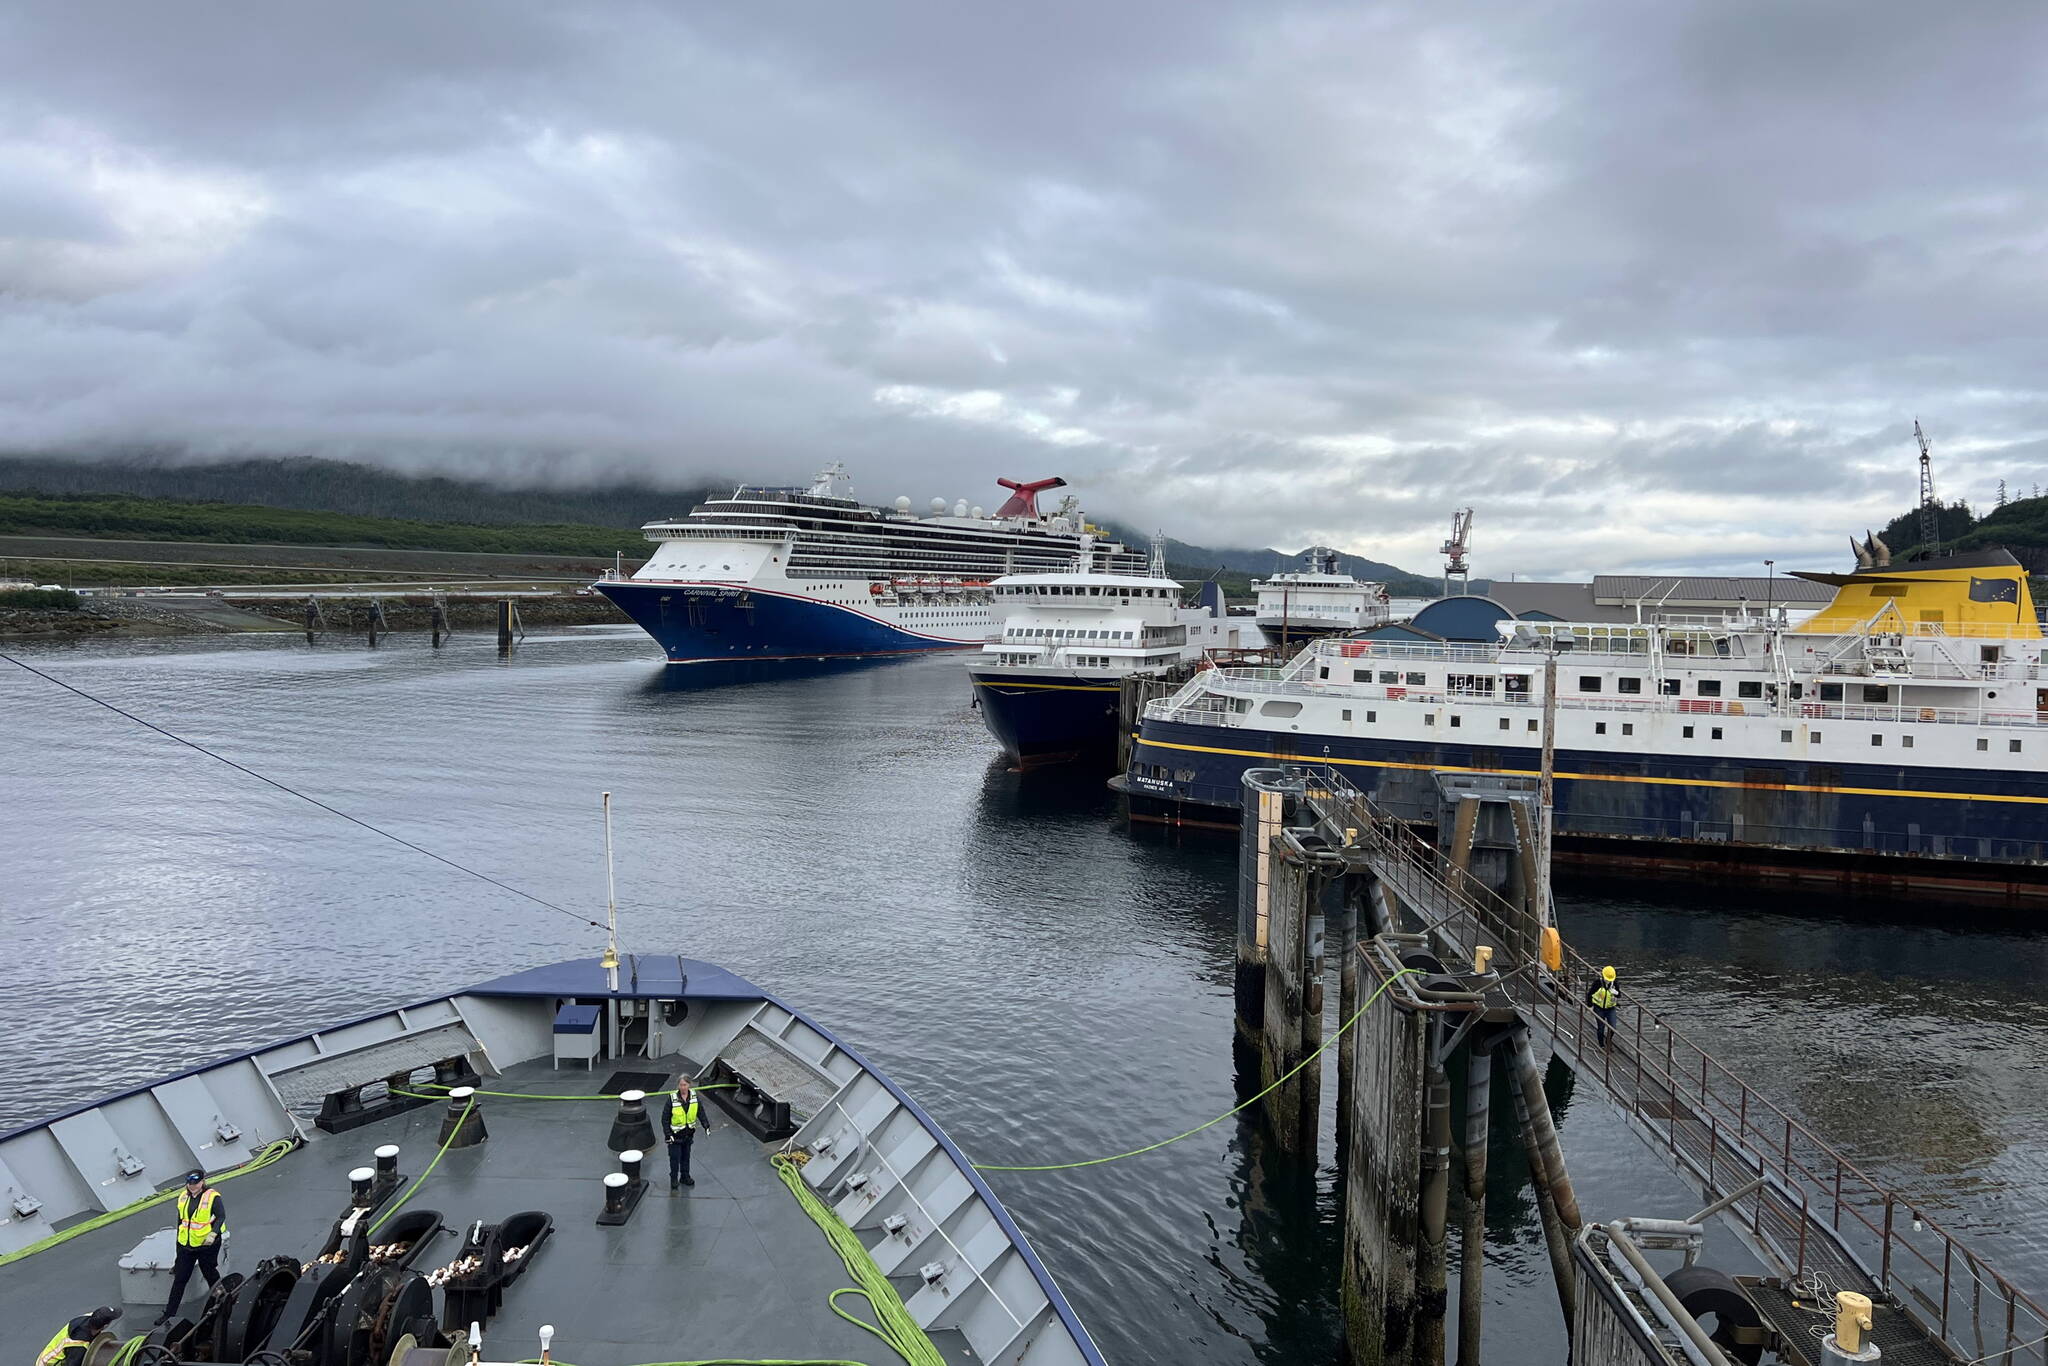 Three Alaska Marine Highway System ferries are docked at its headquarters in Ketchikan as the Columbia arrives on July 16. (Meredith Jordan / Juneau Empire)